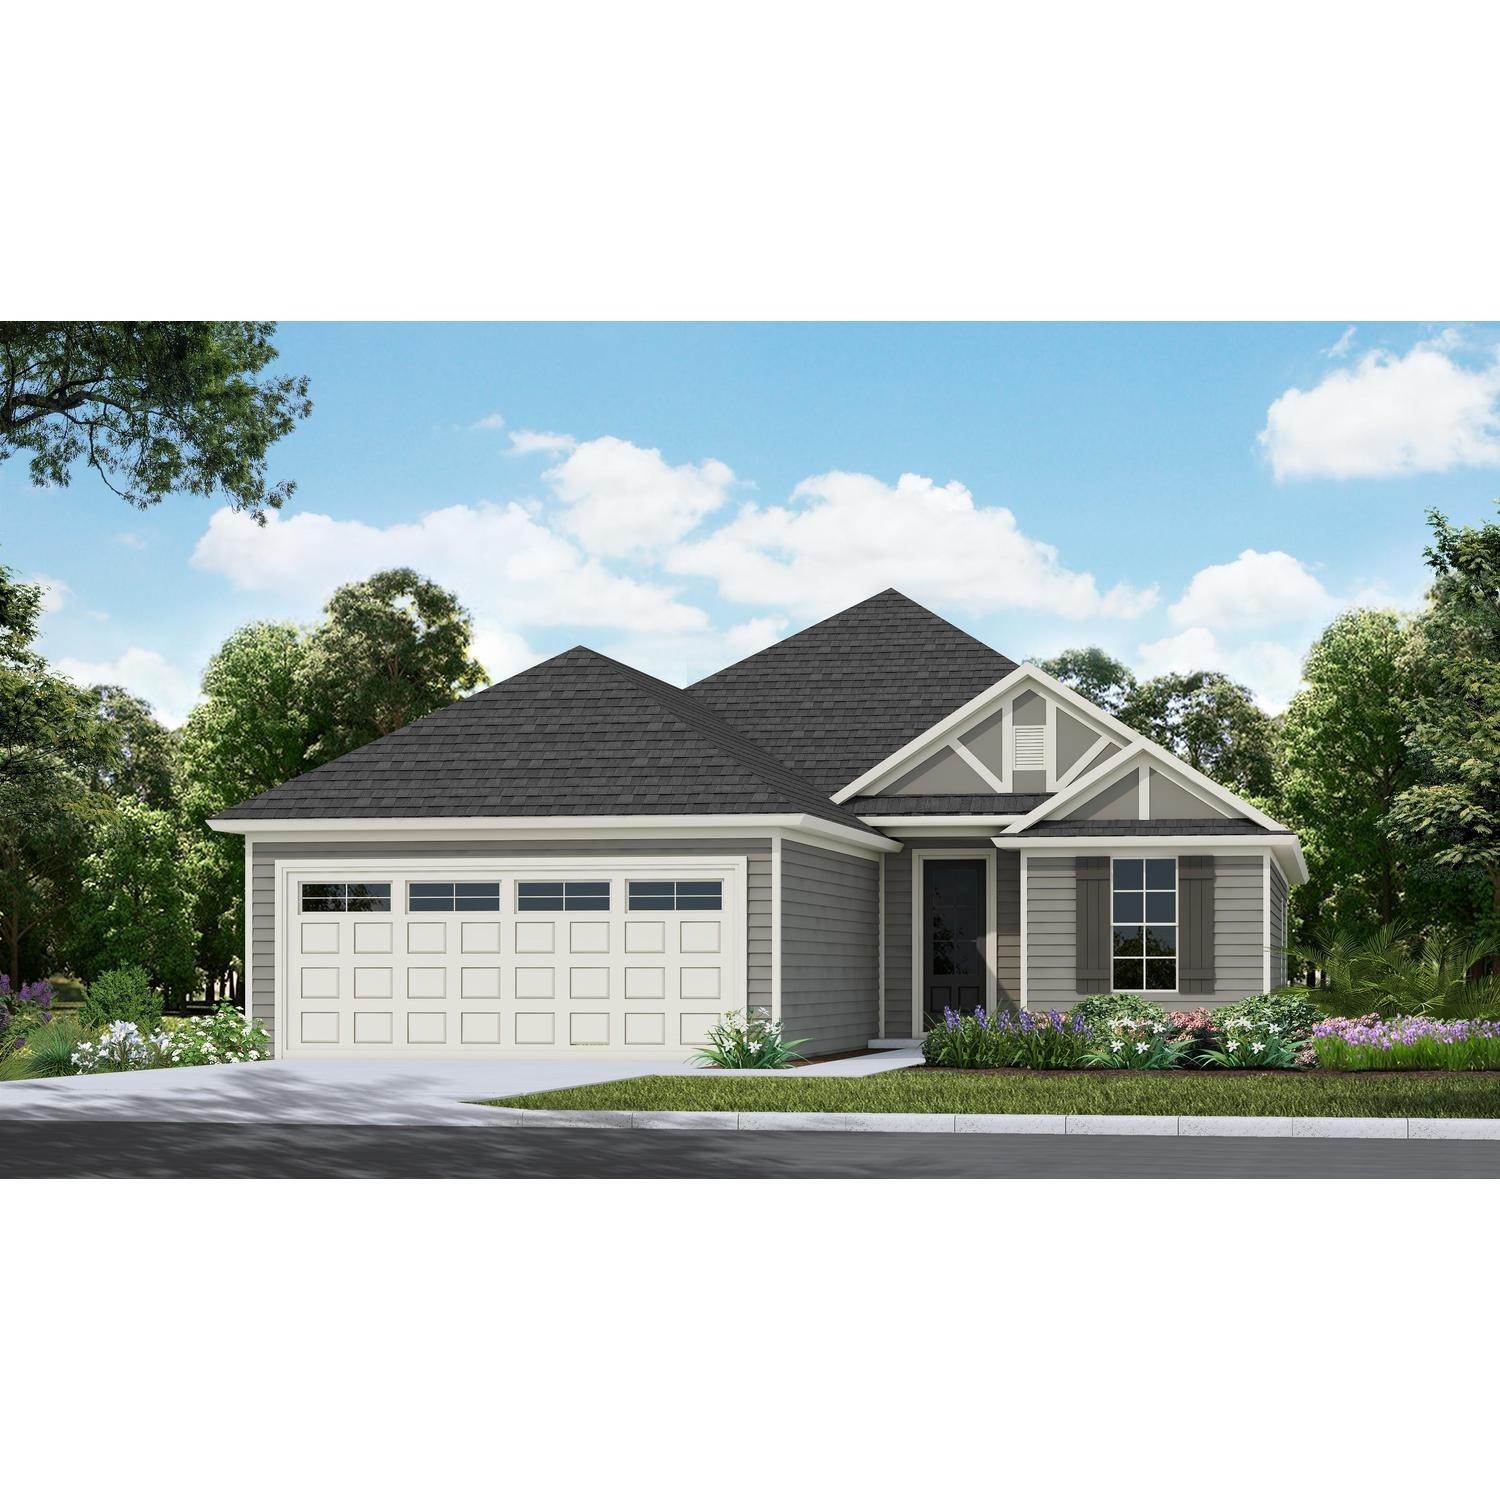 Single Family for Sale at New Park - Raleigh New Park 1361 Barret Park Way MONTGOMERY, ALABAMA 36117 UNITED STATES